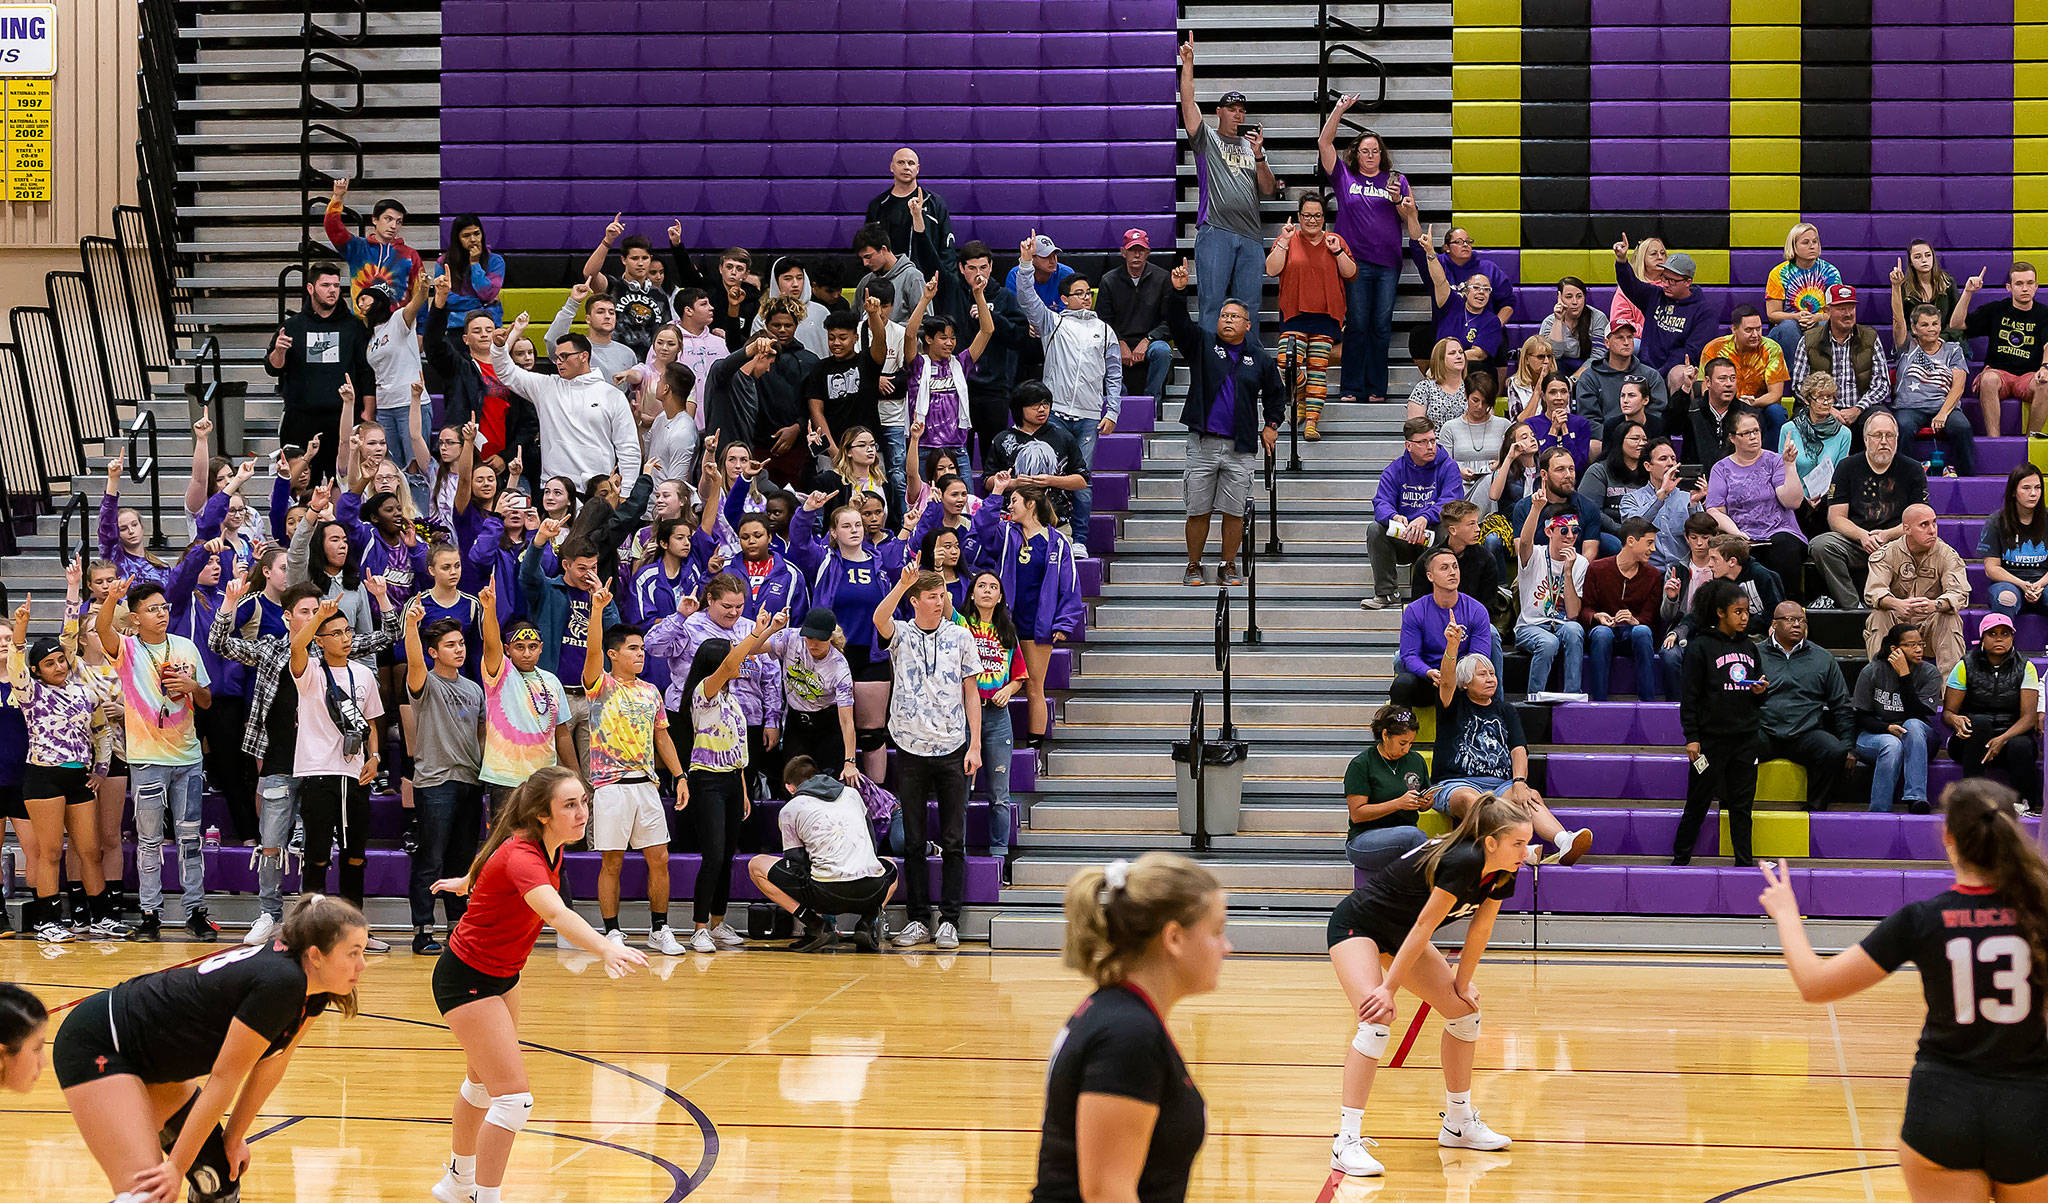 The Oak Harbor fans signal one more point as the Wildcats serve game point in the second set Tuesday. (Photo by John Fisken)